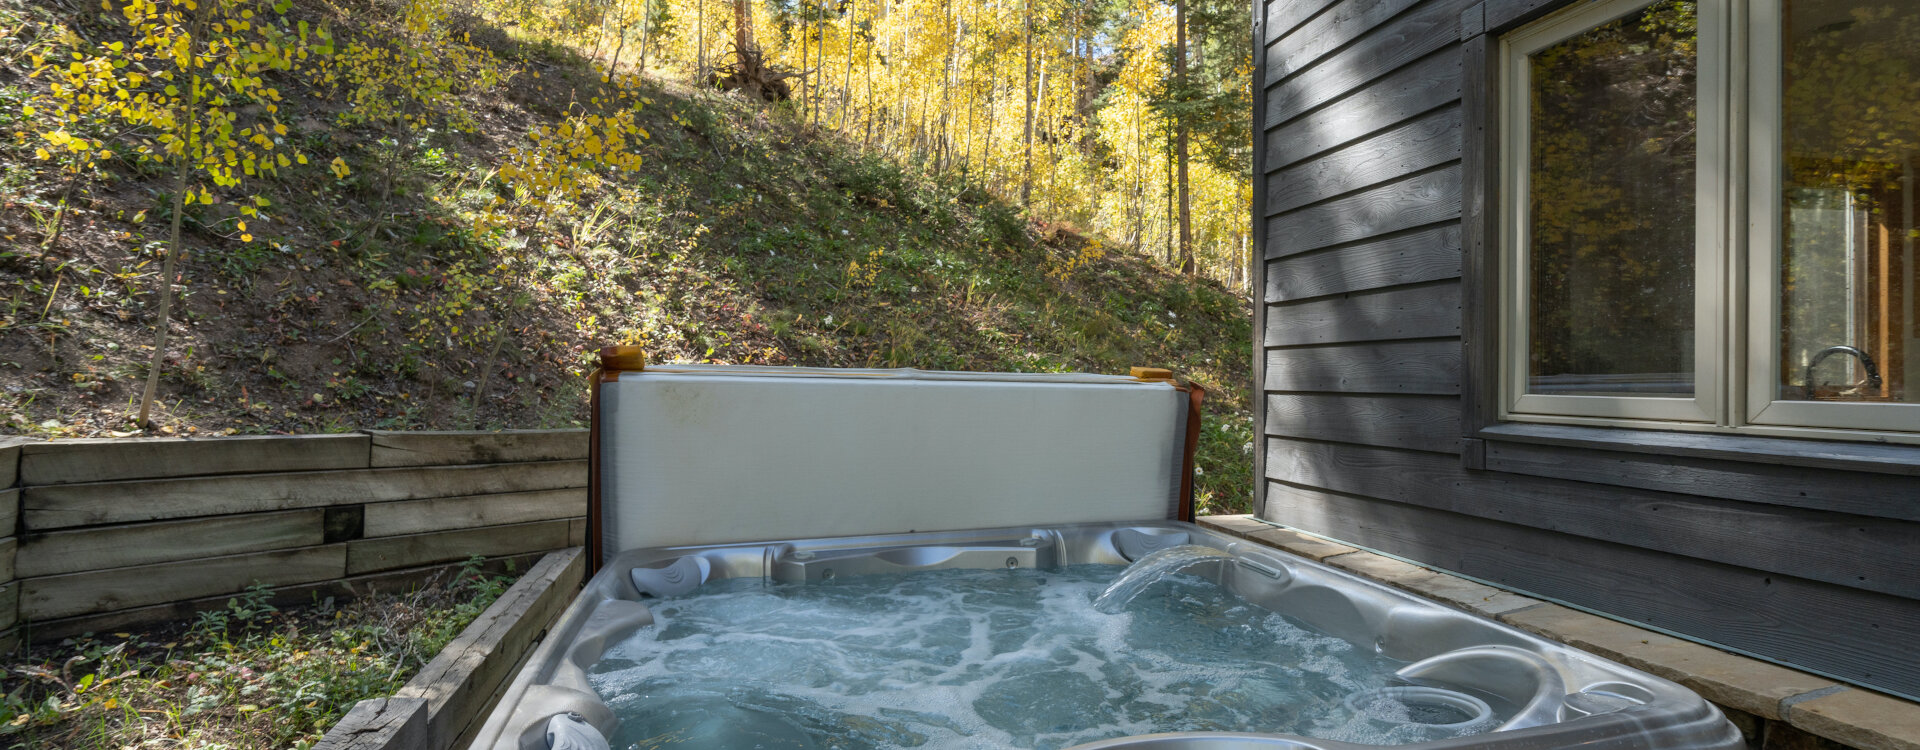 1.20-telluride-haven-on-hang-glider-hot-tub